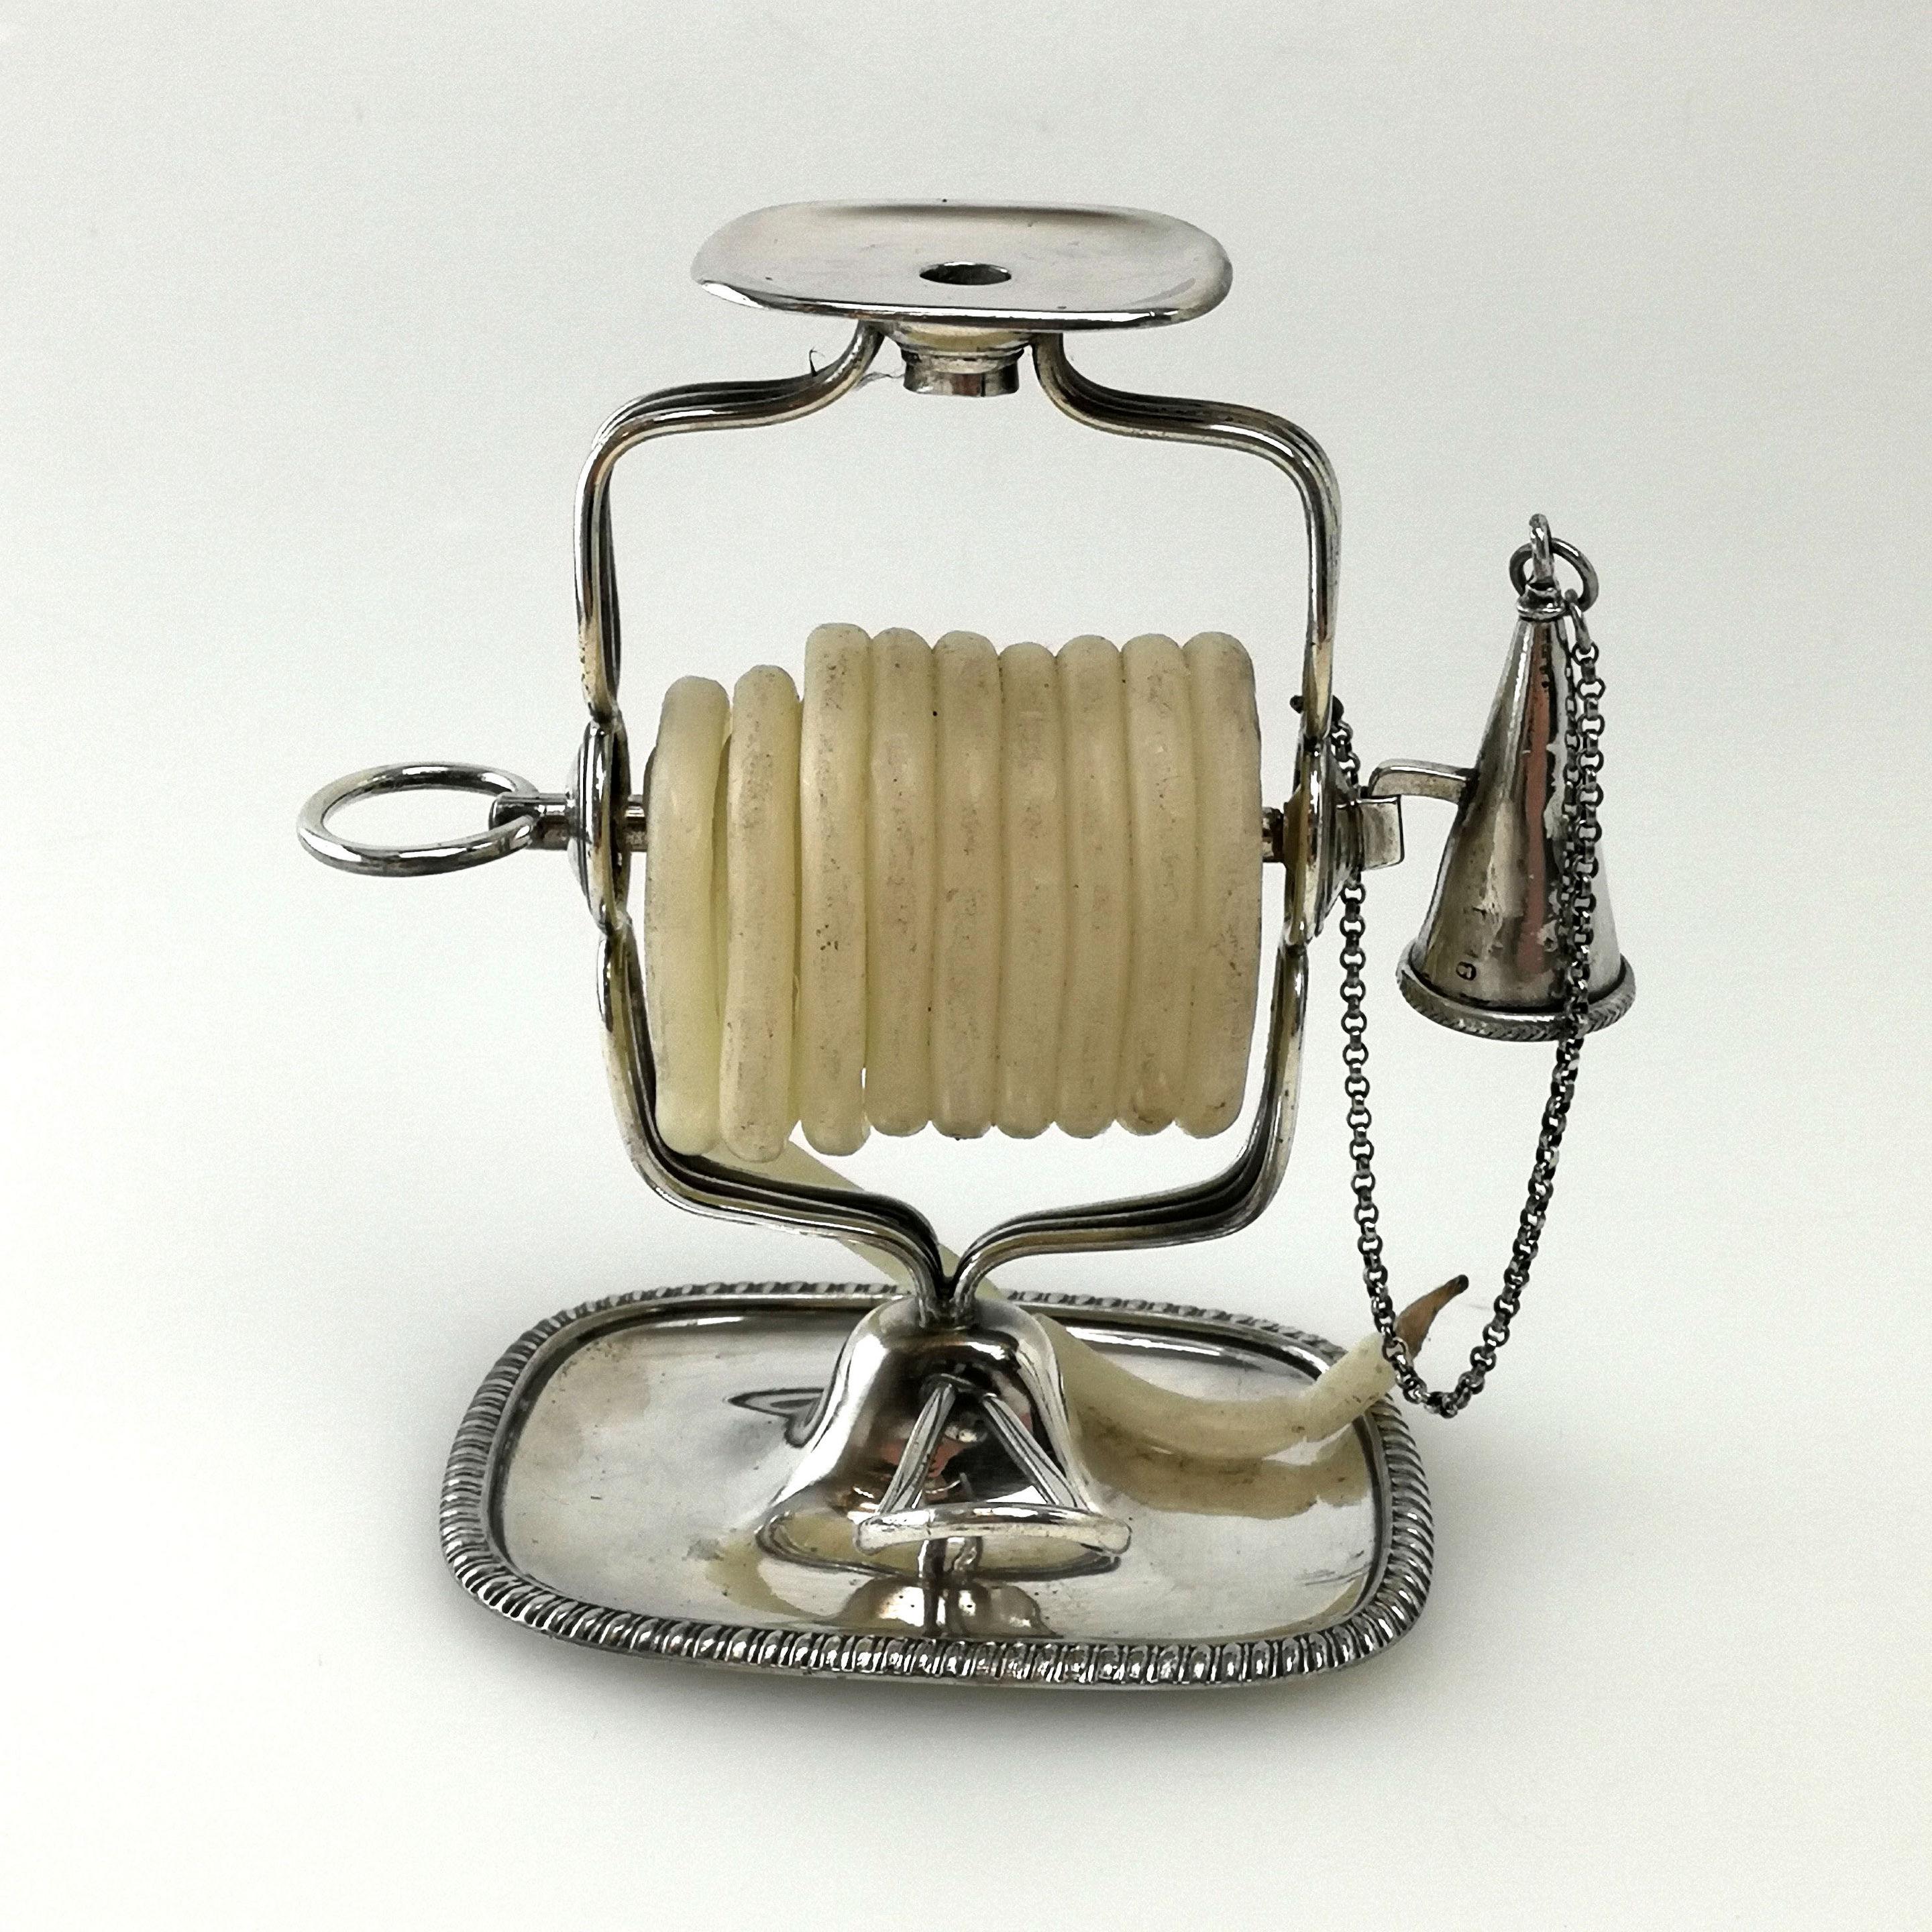 A lovely antique Georgian solid silver wax jack with a rounded corner rectangular base with a gadroon border. The wax jack has a small conical snuffer on a chain and has a roll of white wax.
 
 Made in Sheffield in 1805 by William Tucker, James